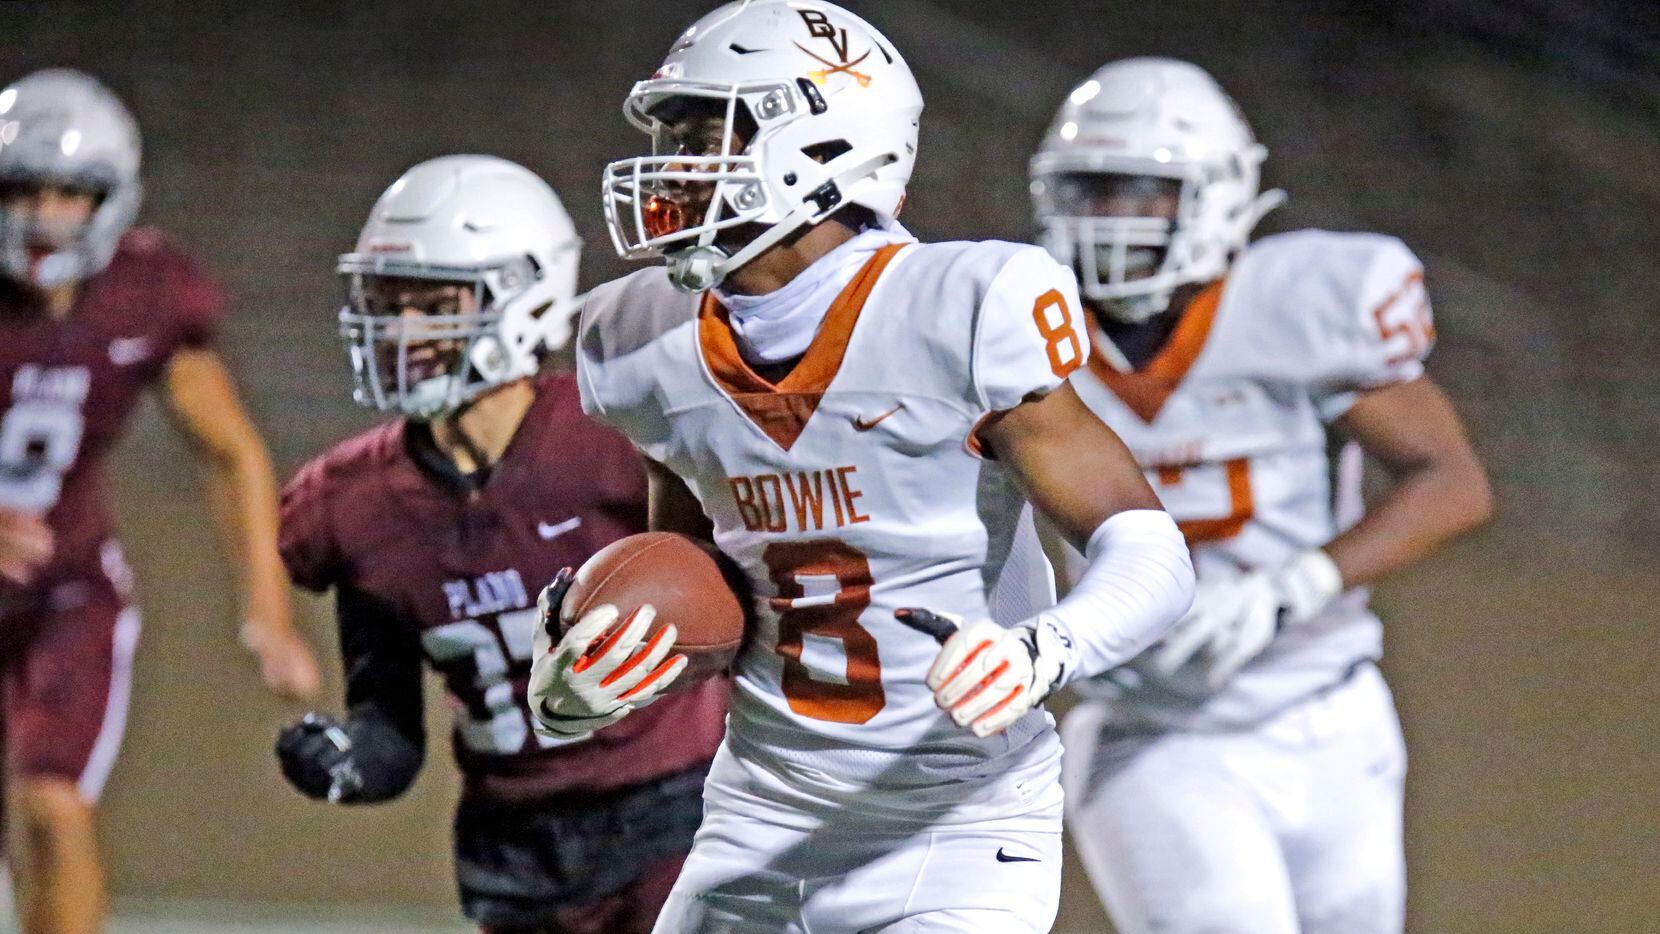 Arlington Bowie wide receiver Kelby Valsin (8) takes a pass at the line of scrimmage and...